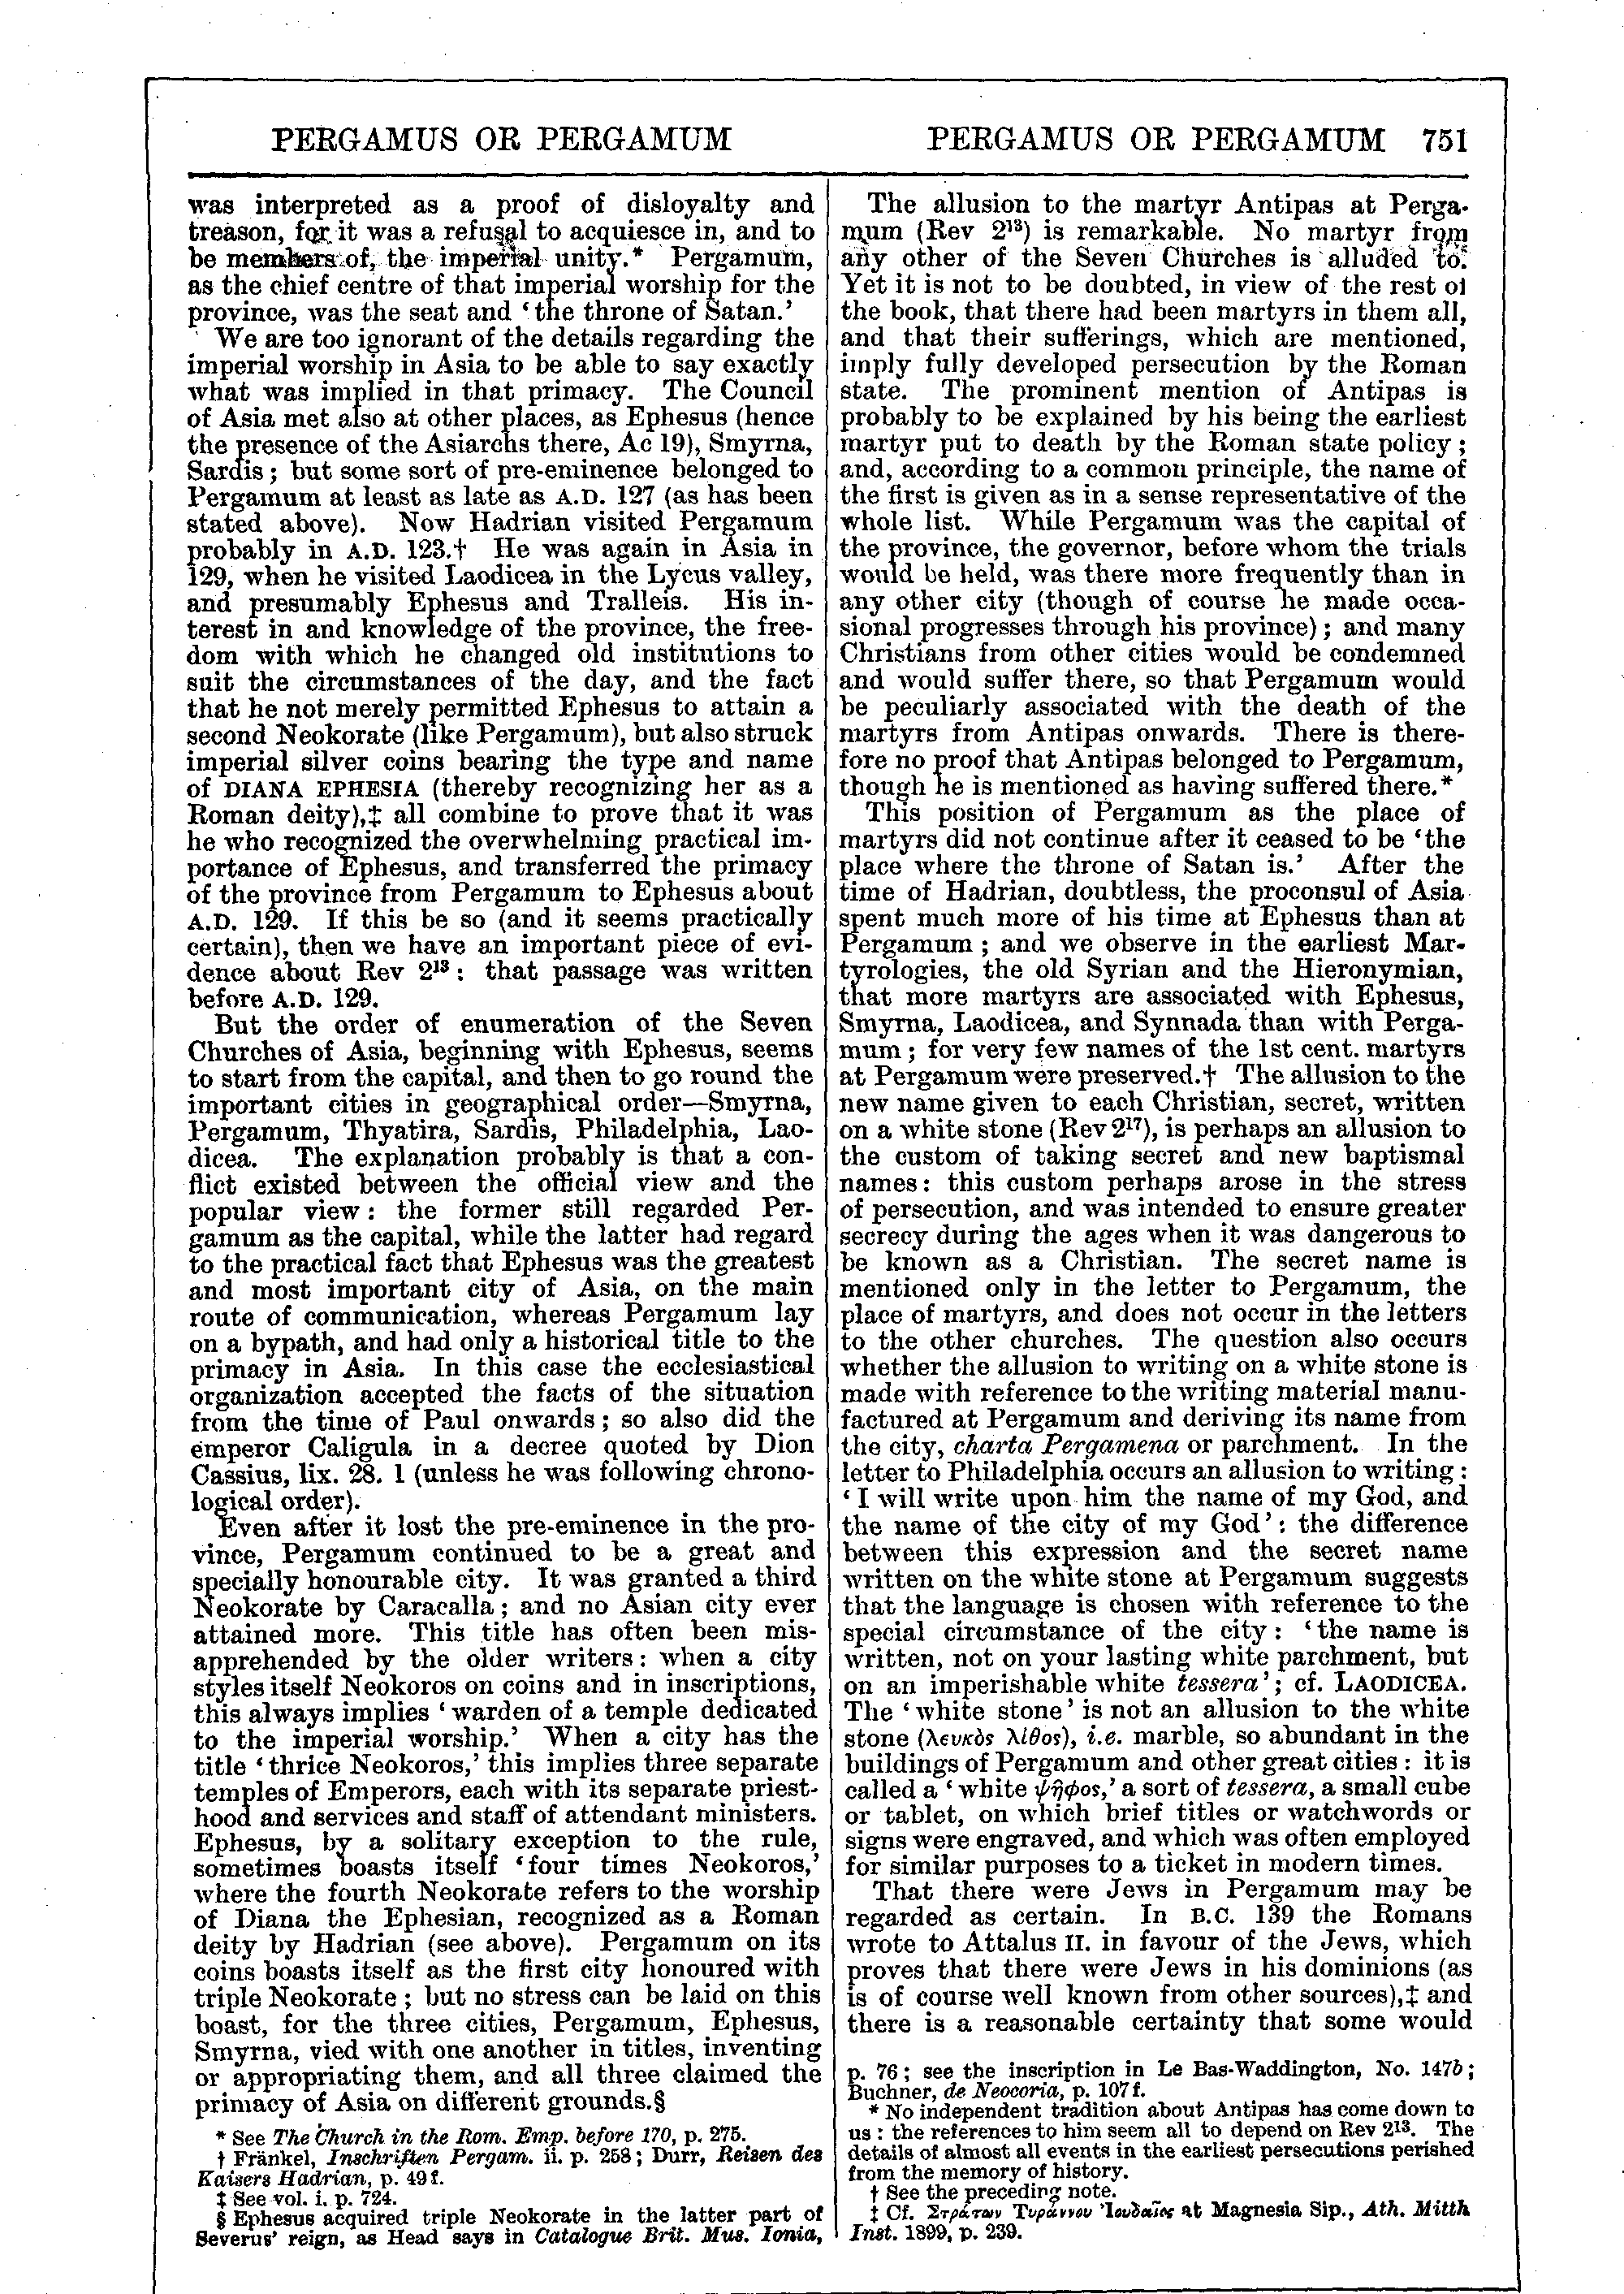 Image of page 751